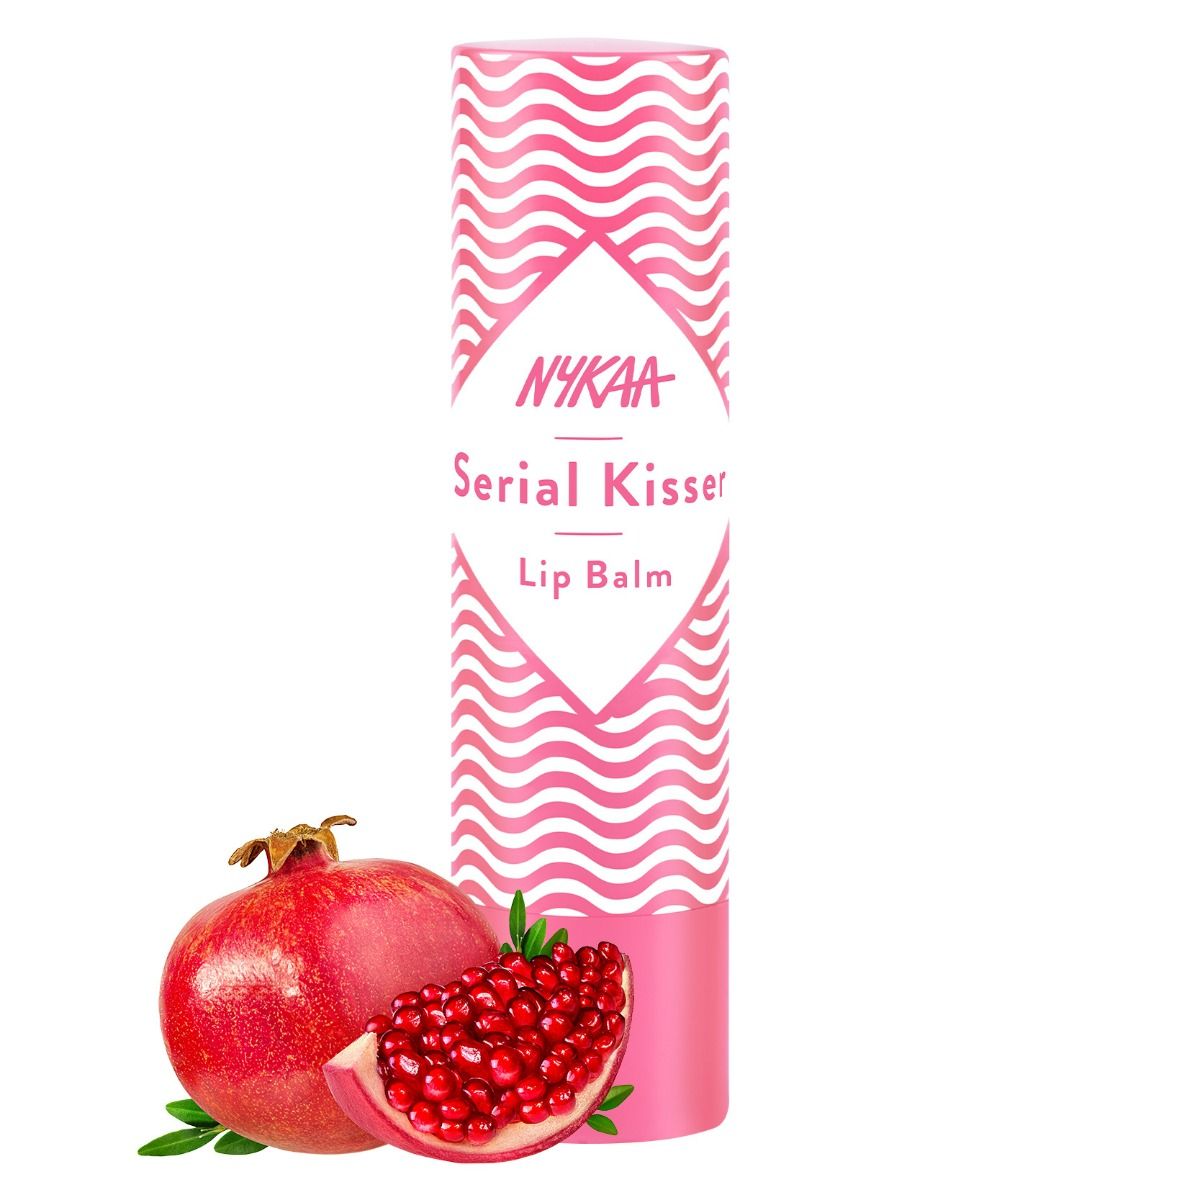 Nykaa Serial Kisser Pomegranate Flavour Lip Balm, 4.5 gm, Pack of 1 